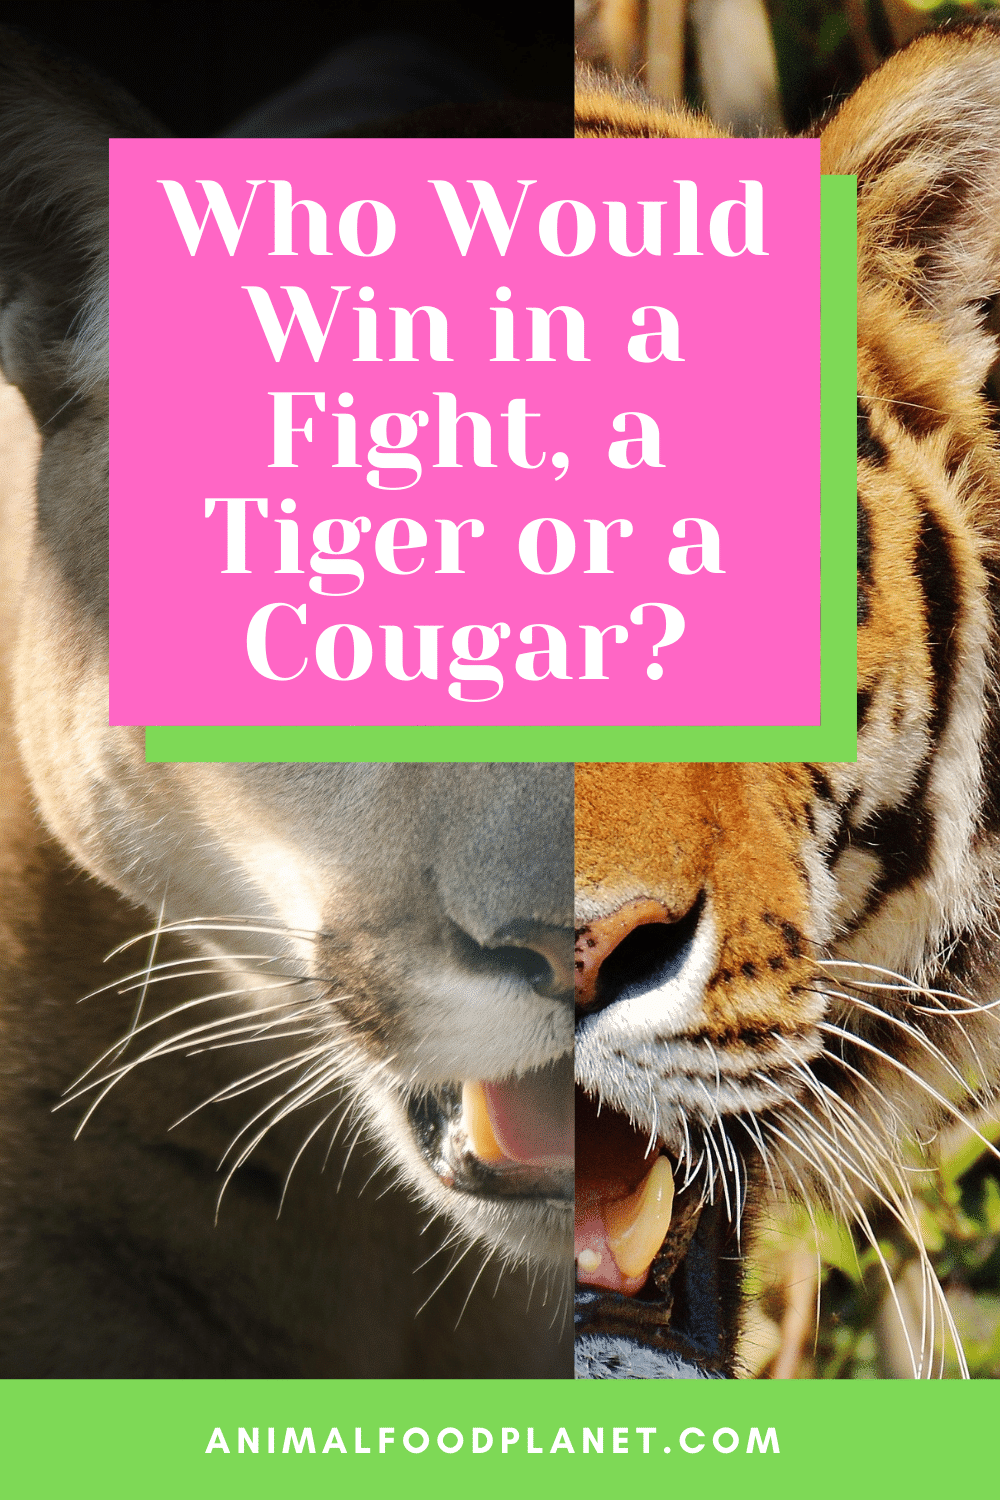 Who would win in a fight, a tiger or a cougar?